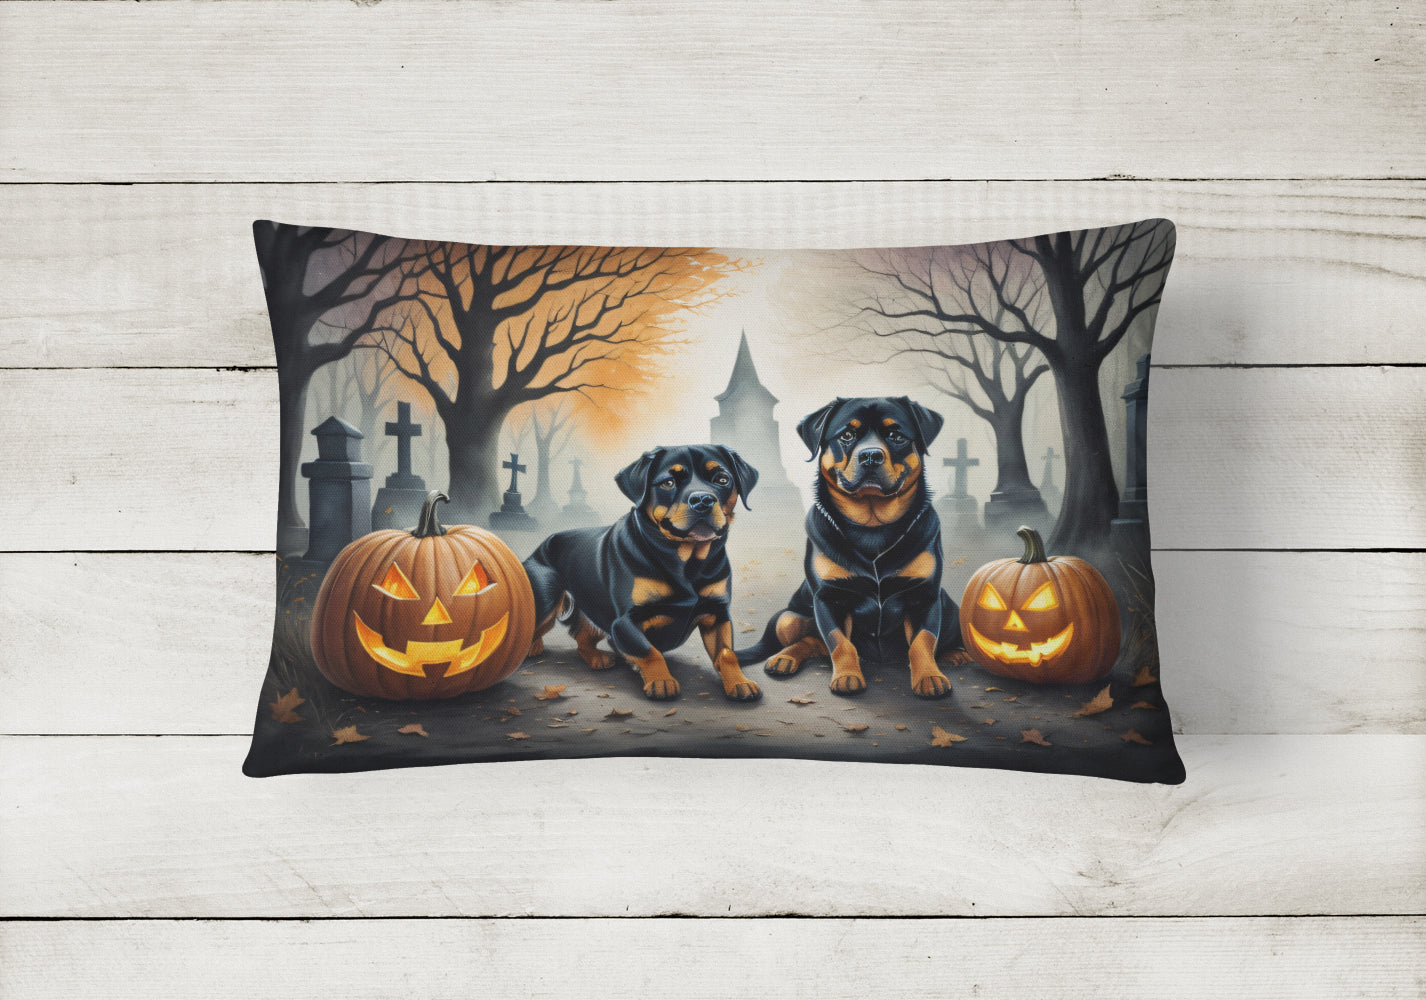 Buy this Rottweiler Spooky Halloween Fabric Decorative Pillow